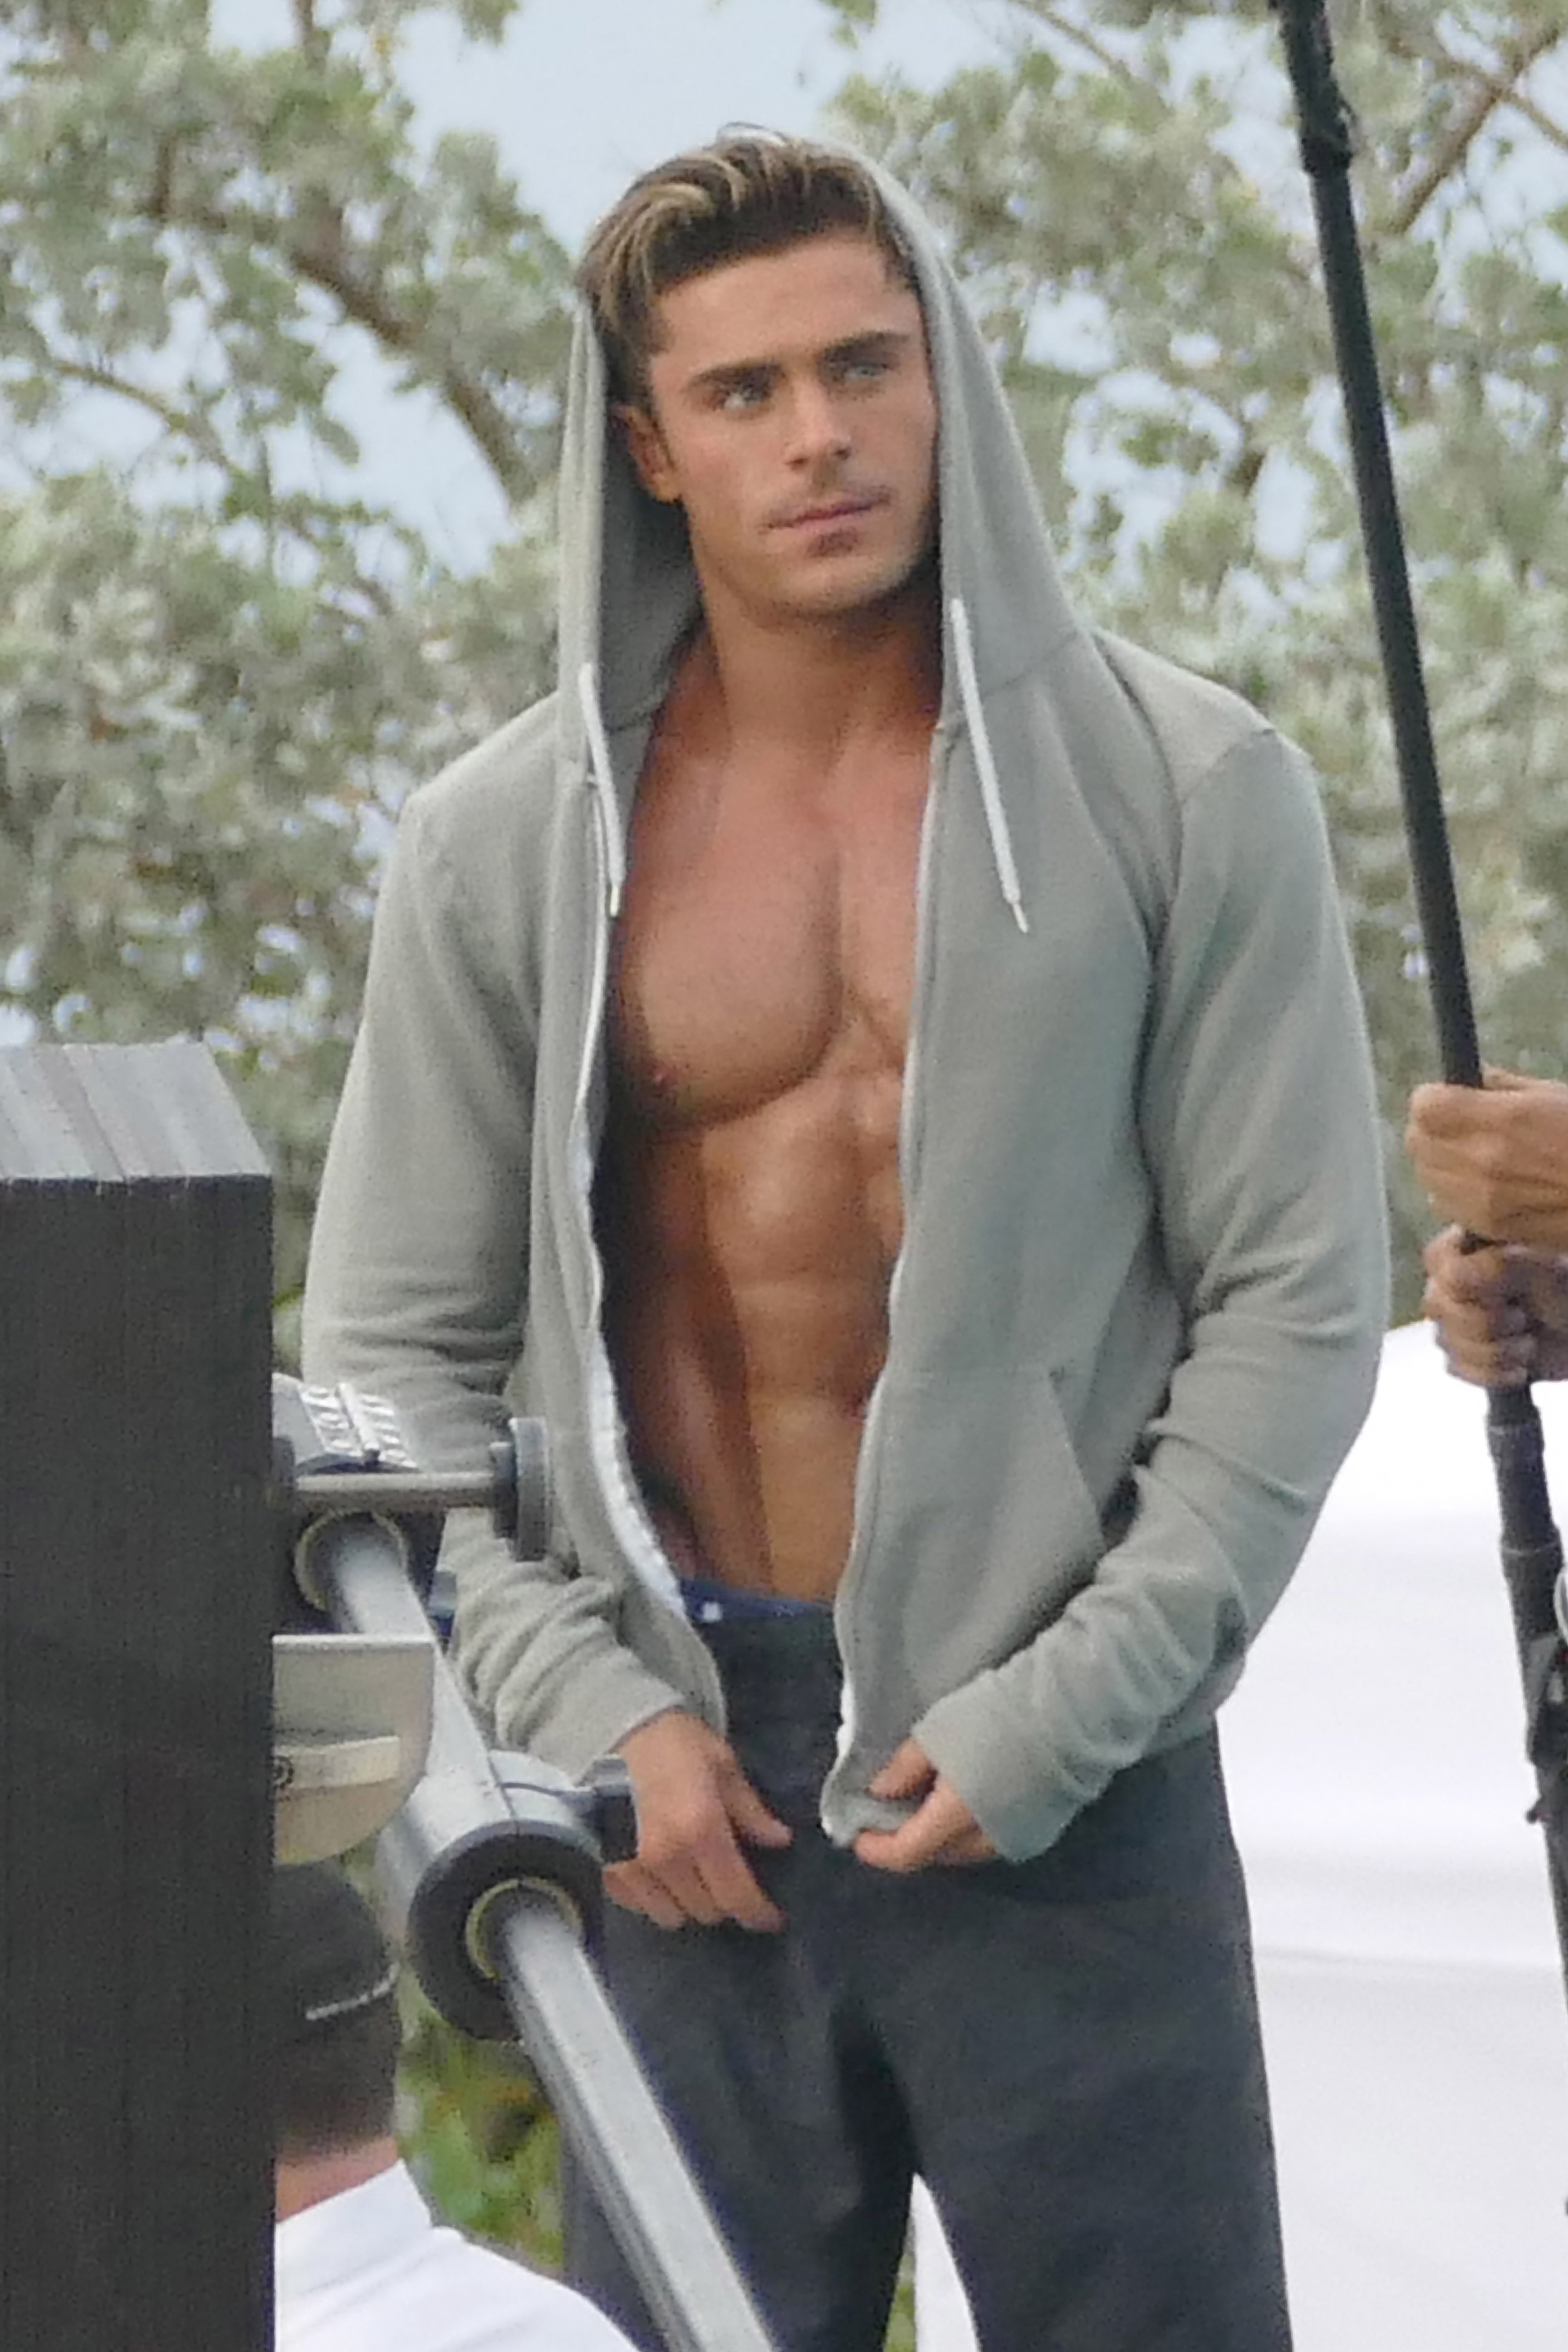 Zac Efron - Greatest Physiques